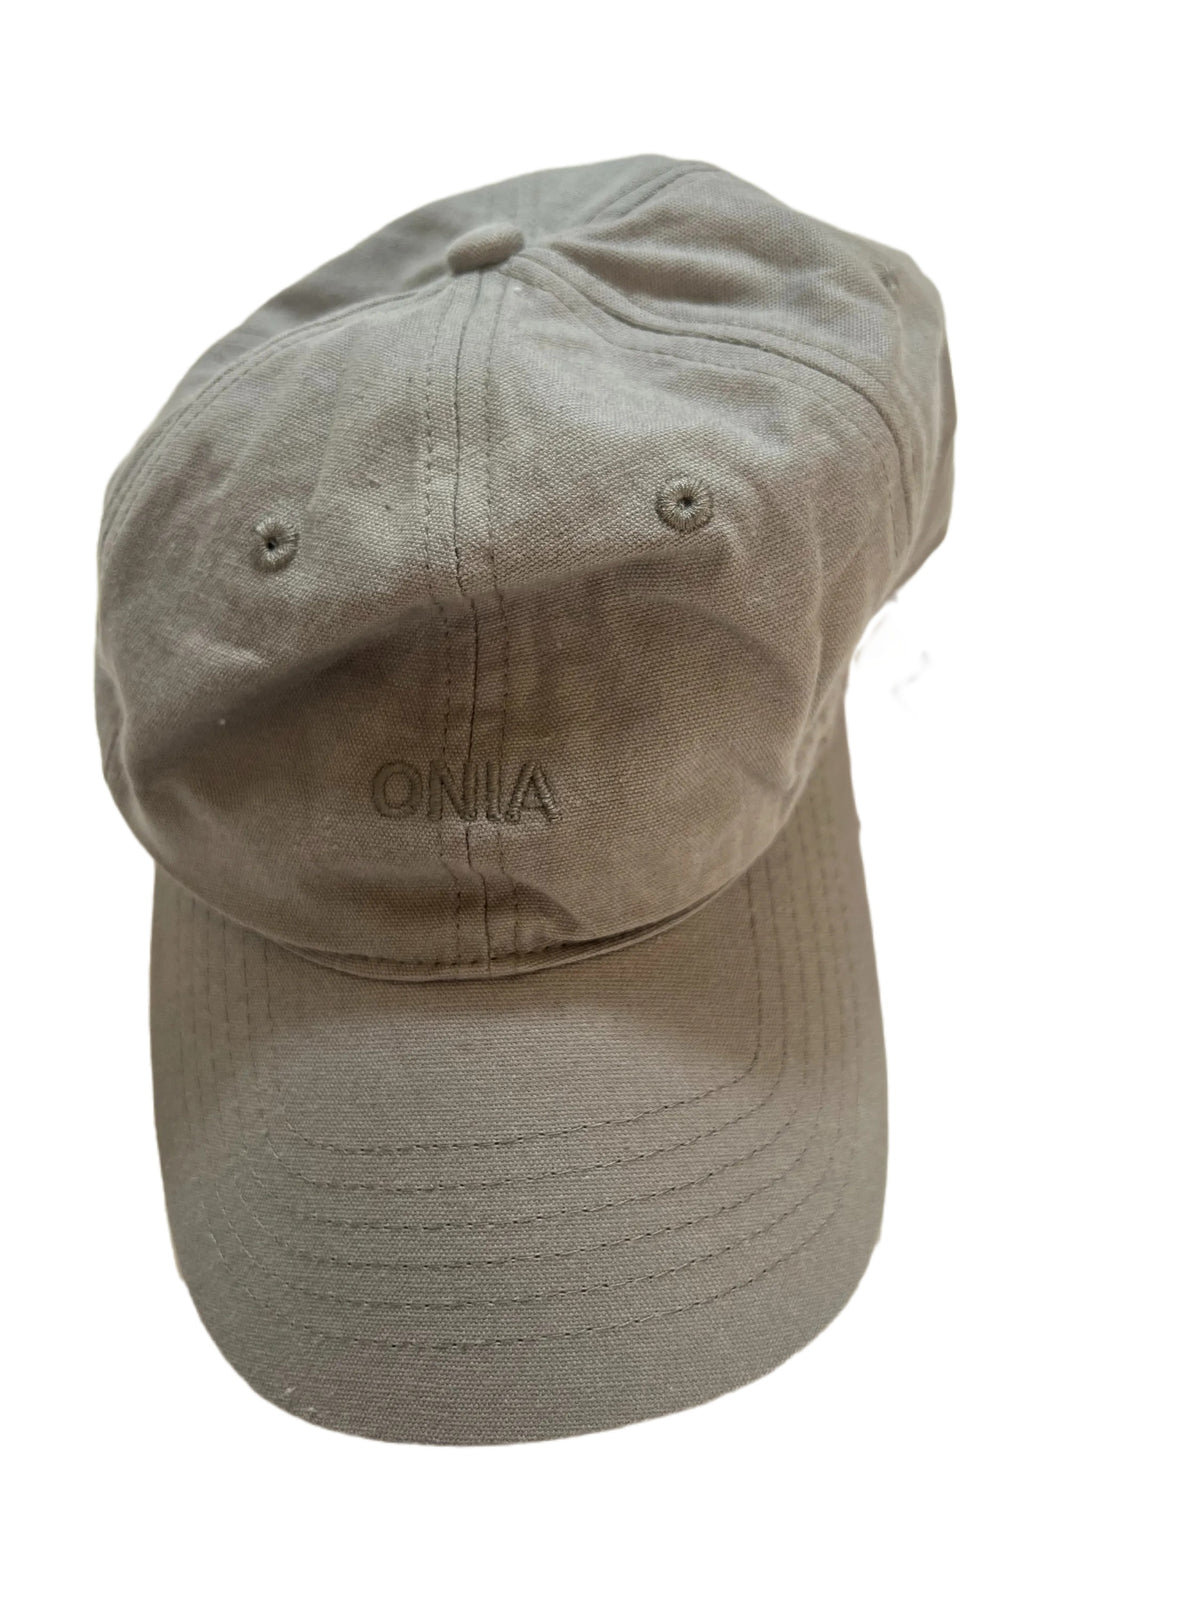 ONIA- Green Baseball Cap New With Tags!